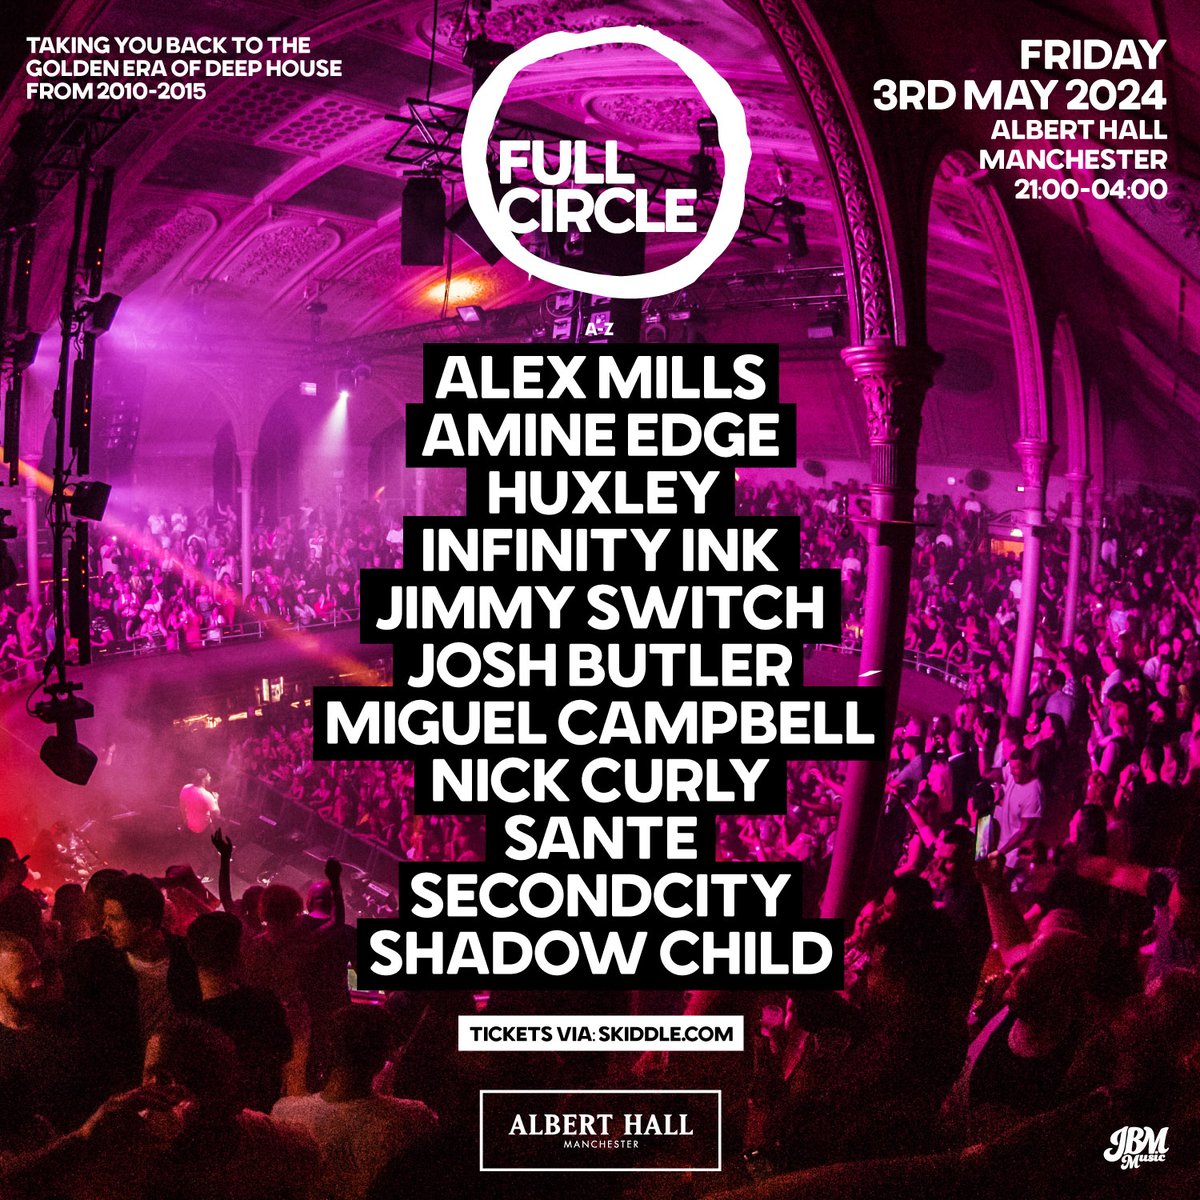 Prepare to embark on a sonic journey back to the golden era of Deep House as Full Circle brings you their biggest party yet! Taking place at our venue on Friday the 3rd of May, featuring @BlameAlexMills, @AmineEdge & DANCE, @Shadow_Child + more! Tickets: tinyurl.com/5ejvfttt